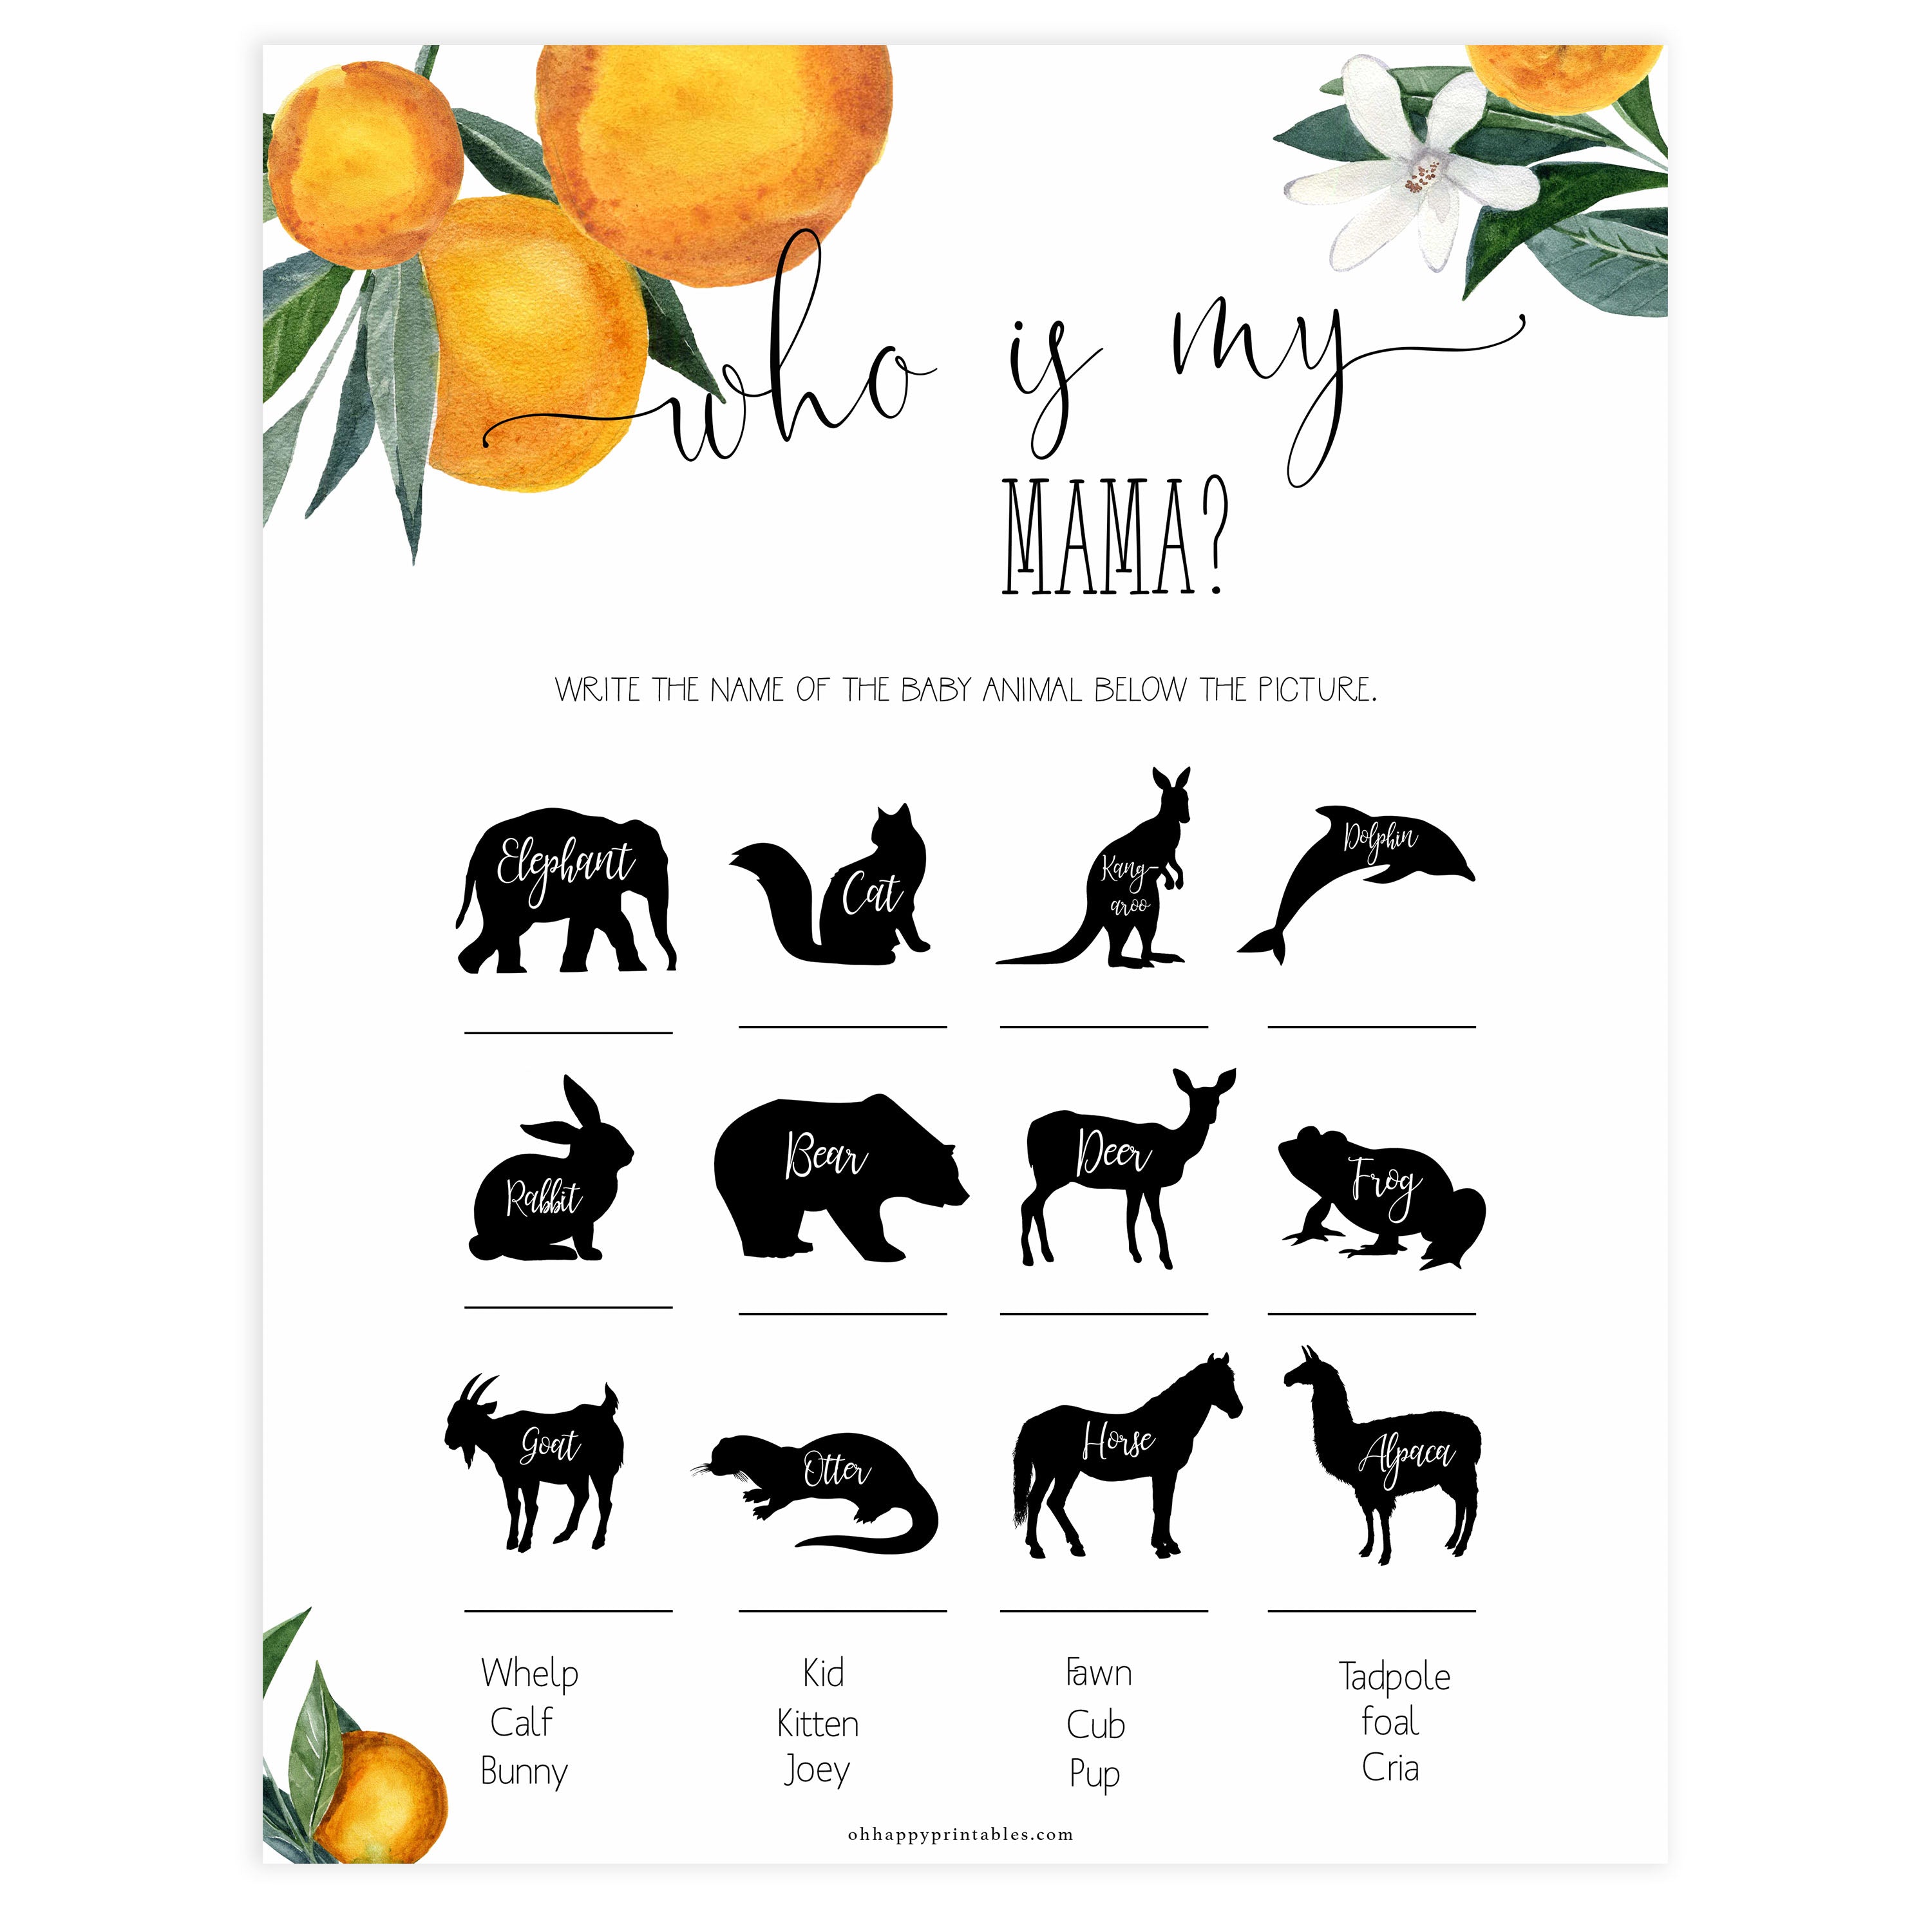 who is my mama baby shower game, Printable baby shower games, little cutie baby games, baby shower games, fun baby shower ideas, top baby shower ideas, little cutie baby shower, baby shower games, fun little cutie baby shower ideas, citrus baby shower games, citrus baby shower, orange baby shower